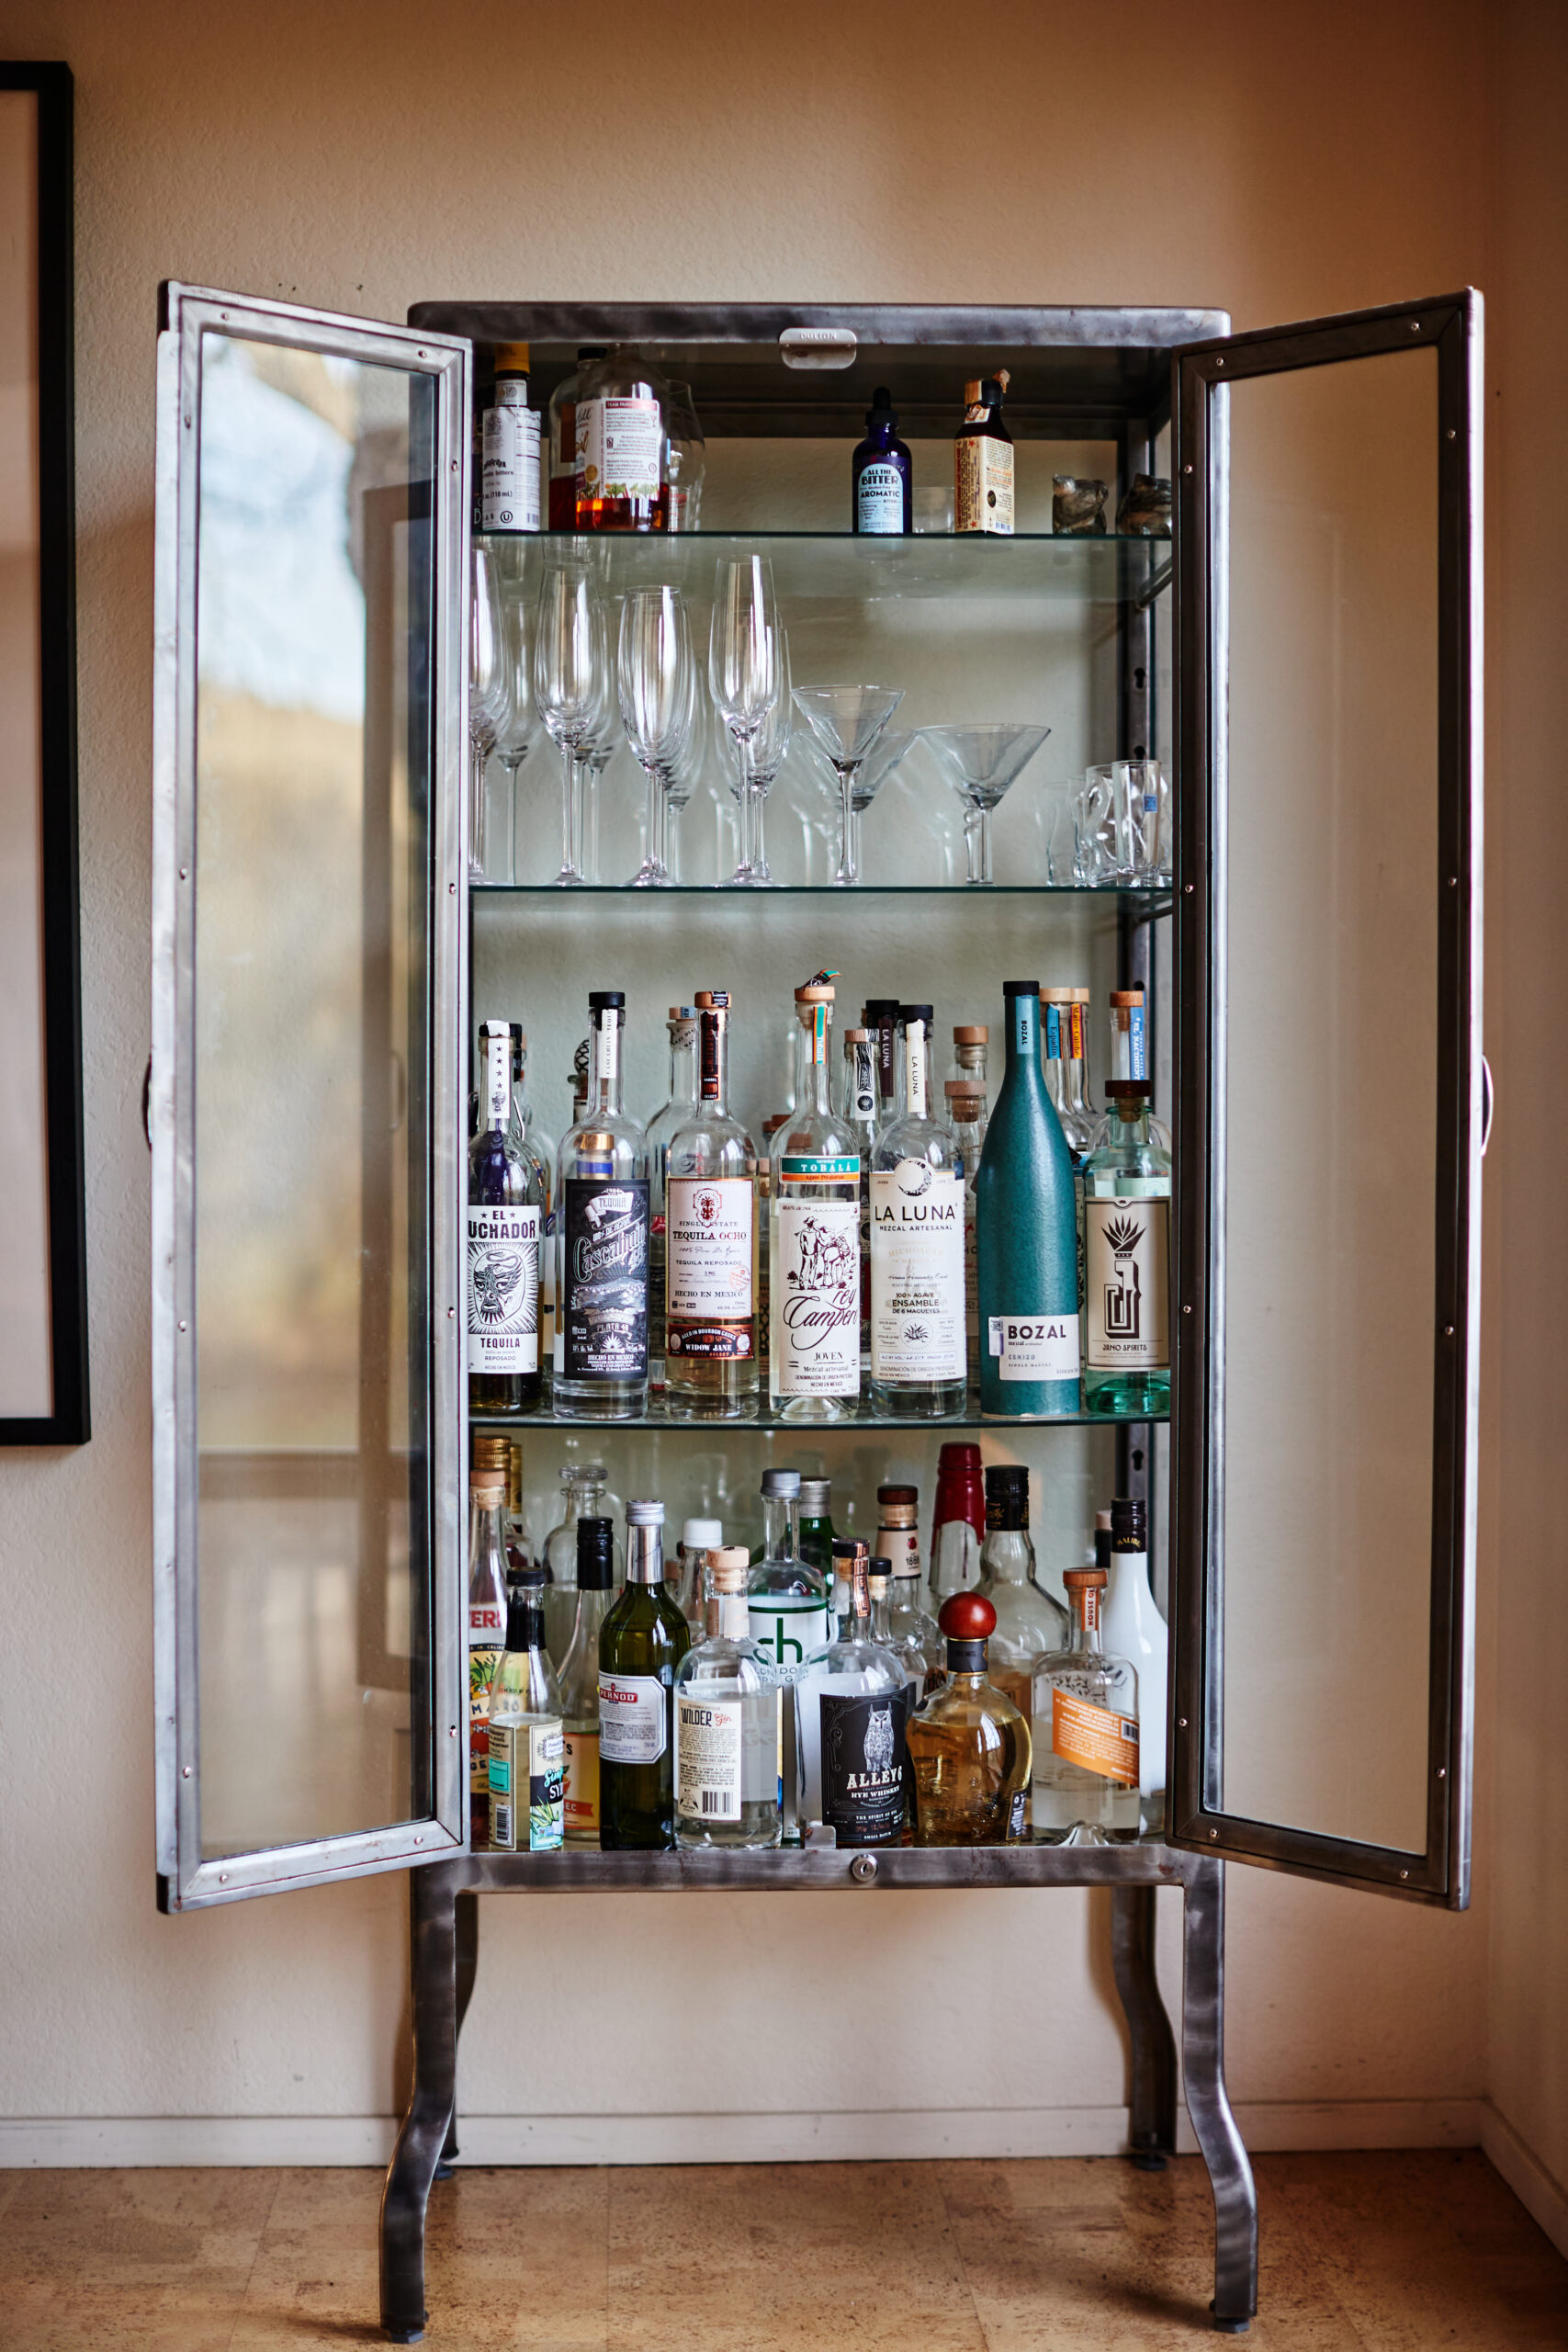 The couple’s tequila and mezcal collection. (Kim Carroll/For Sonoma Magazine)